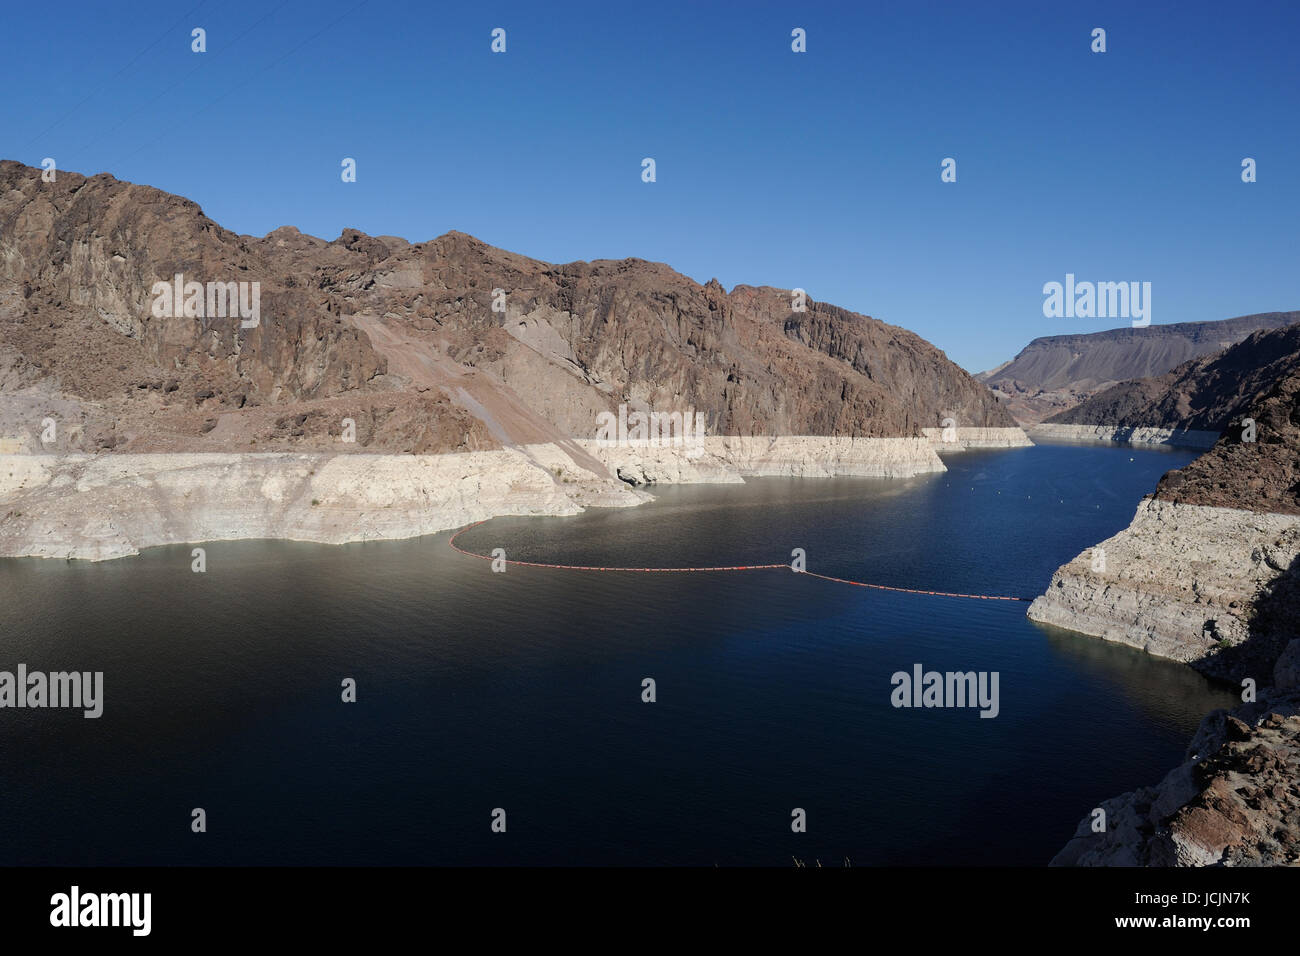 Hoover Dam on the Colorado River, Lake Mead.view, USA Nevada border Stock Photo